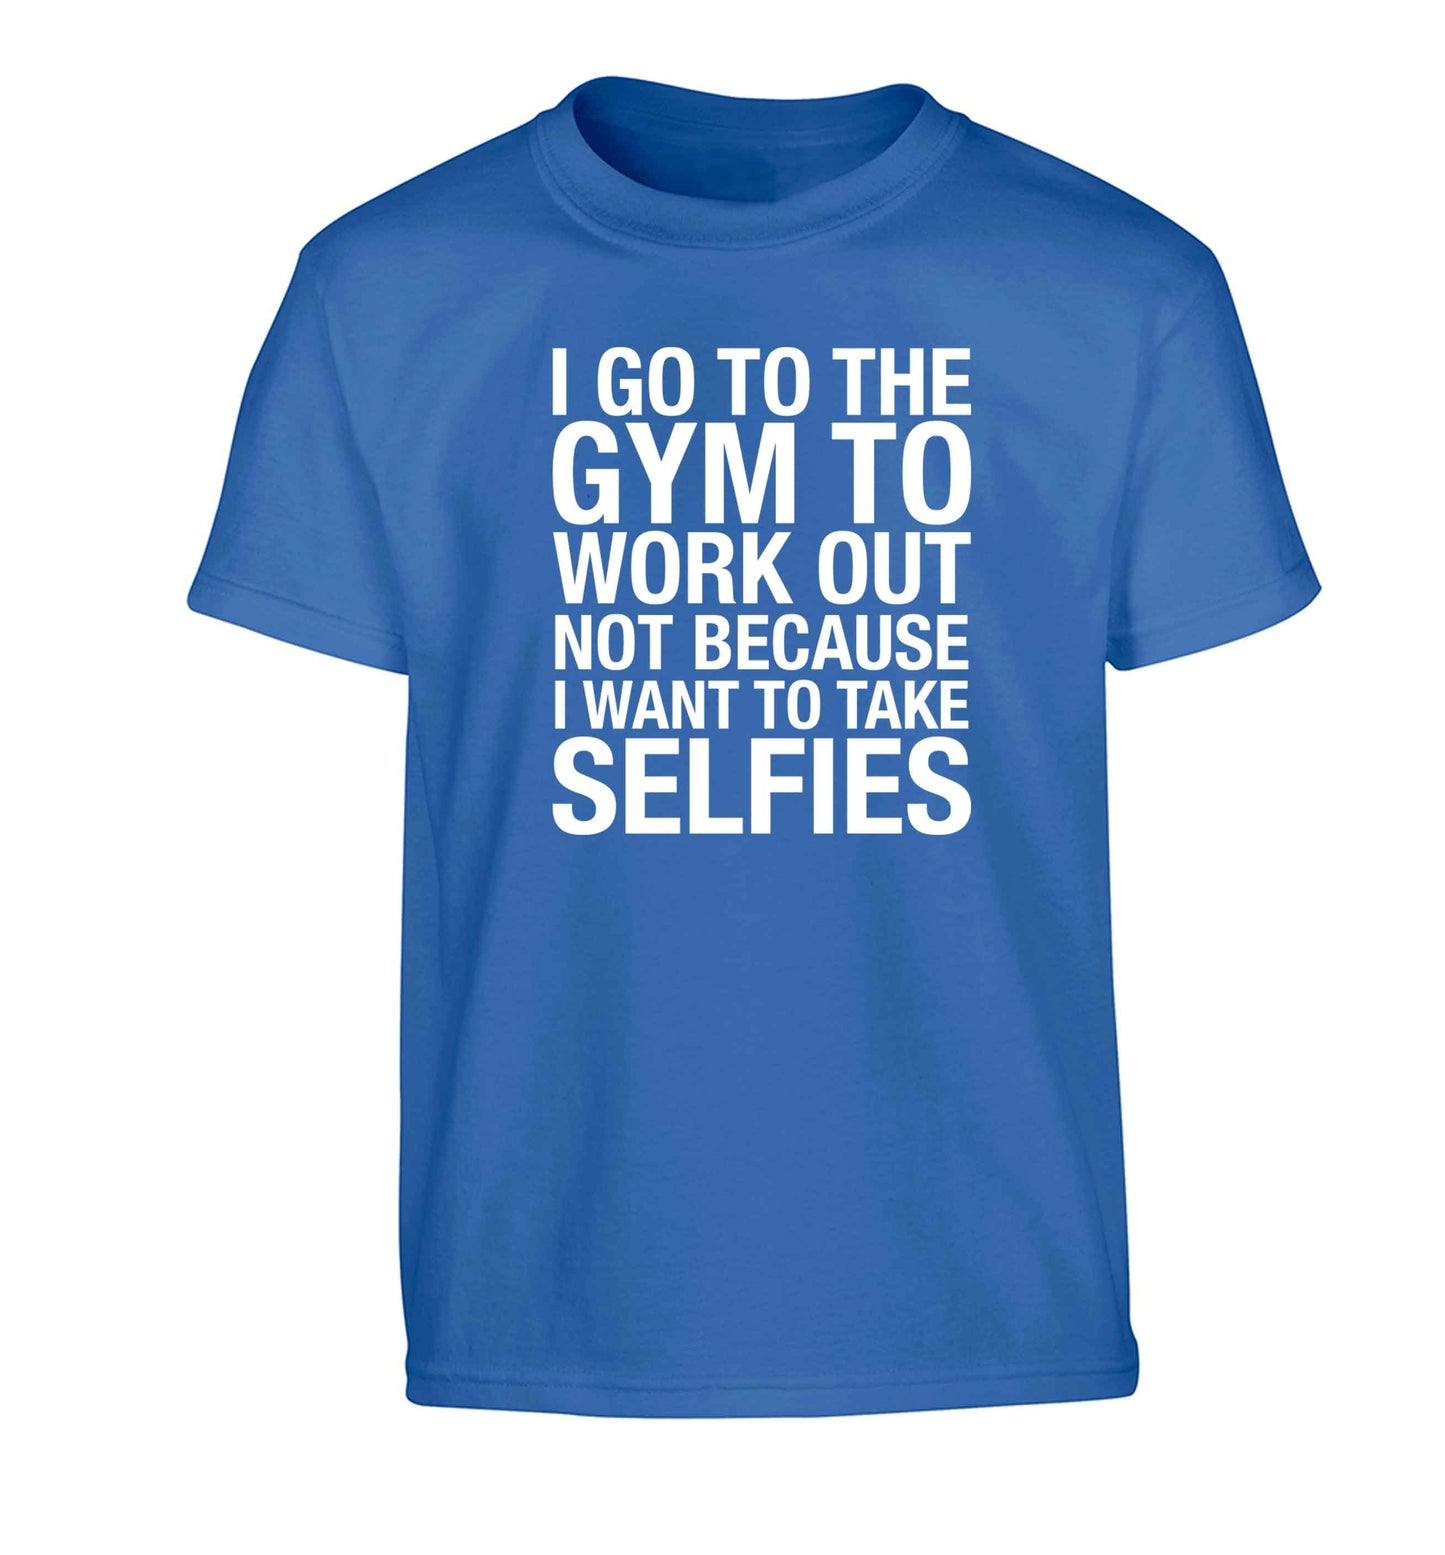 I go to the gym to workout not to take selfies Children's blue Tshirt 12-13 Years